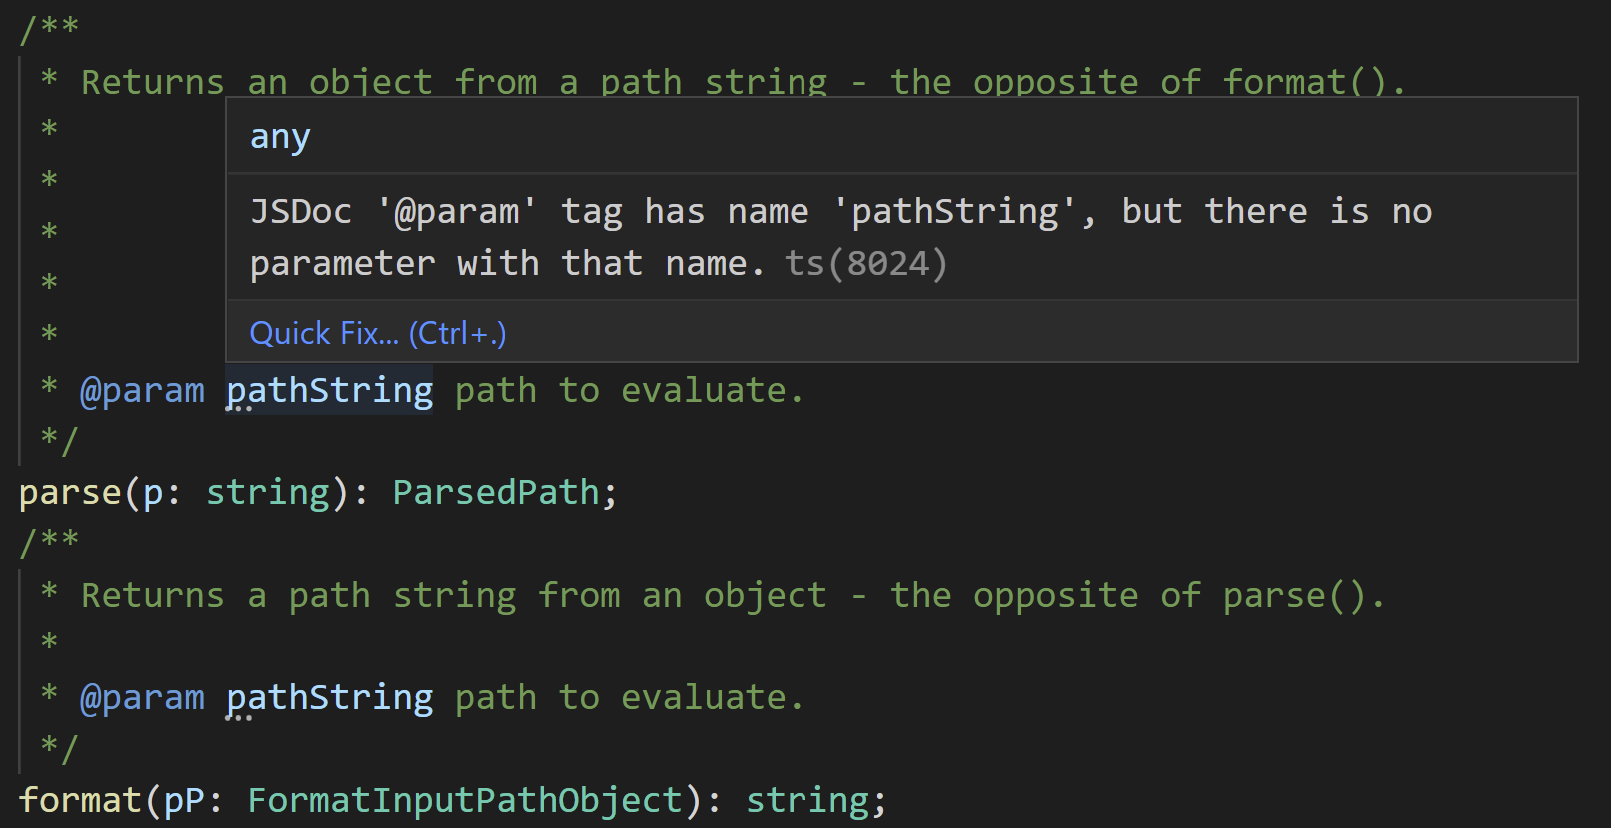 Suggestion diagnostics being shown in the editor for parameter names in JSDoc comments that don't match an actual parameter name.